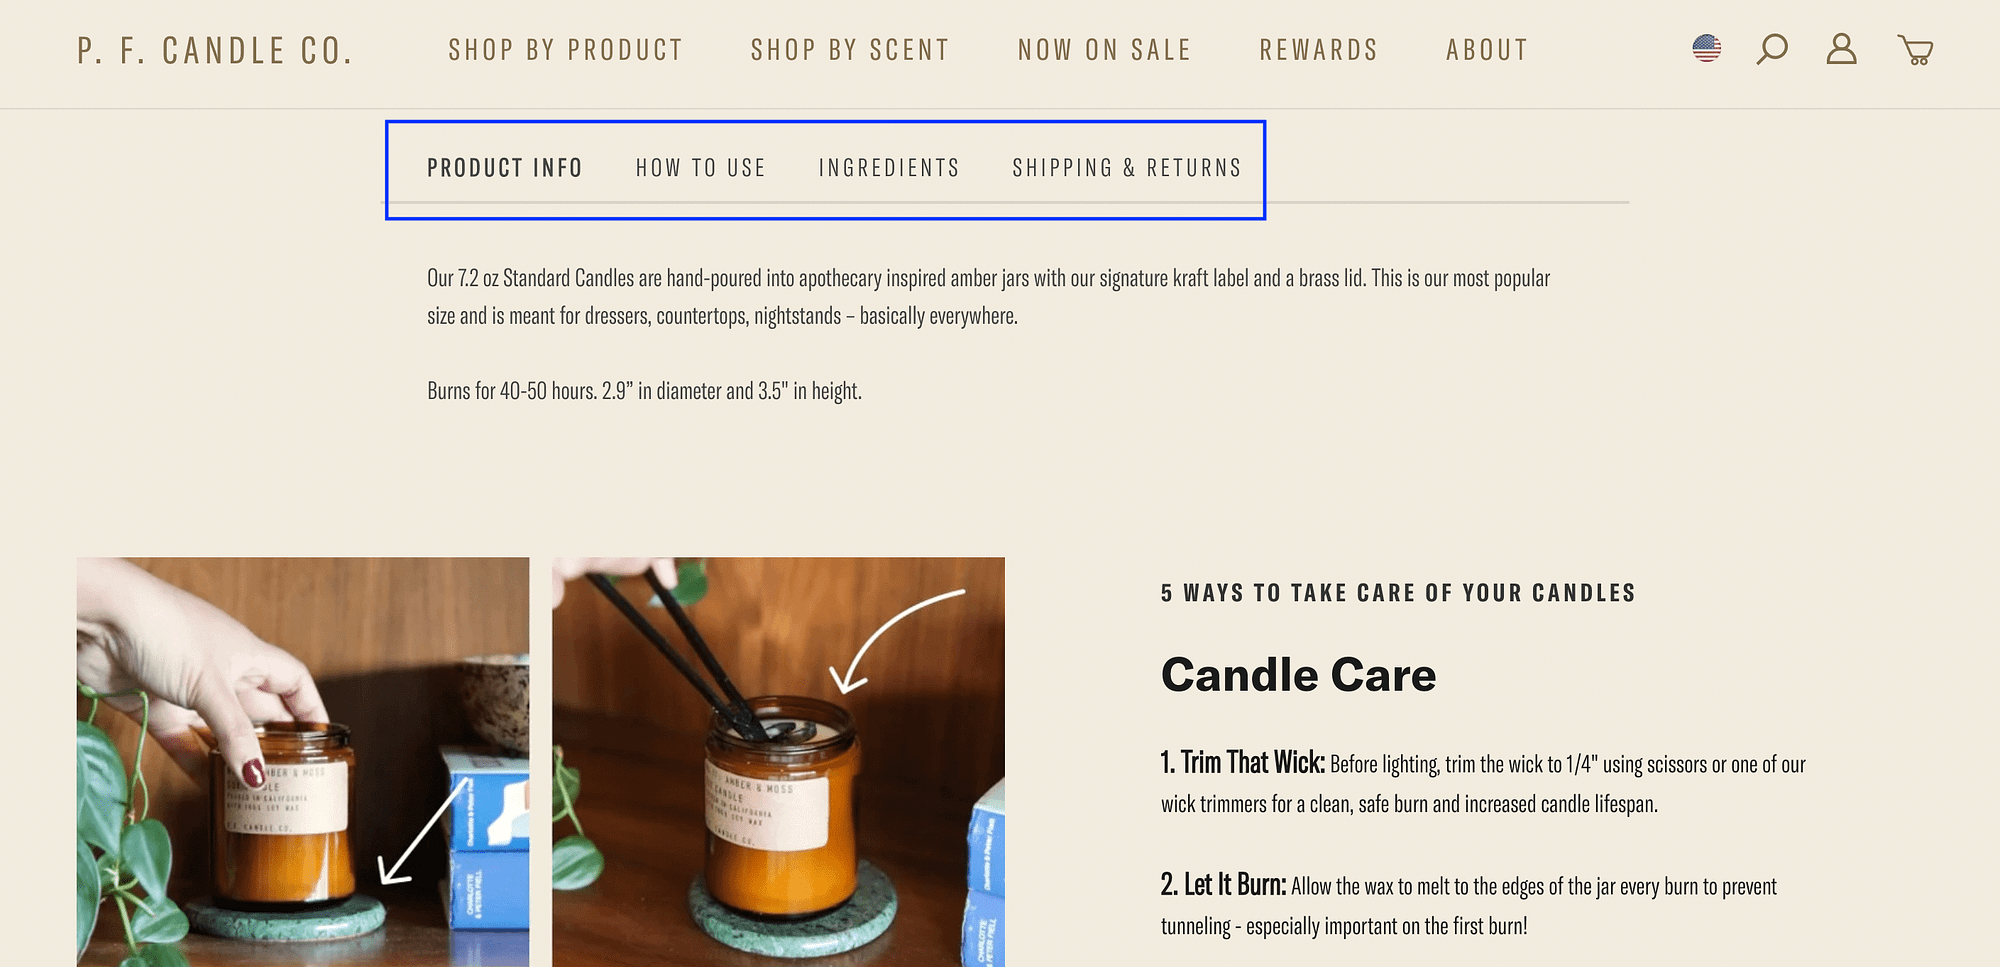 An example of the structure of a product description template on the P.F. Candle Co. website.